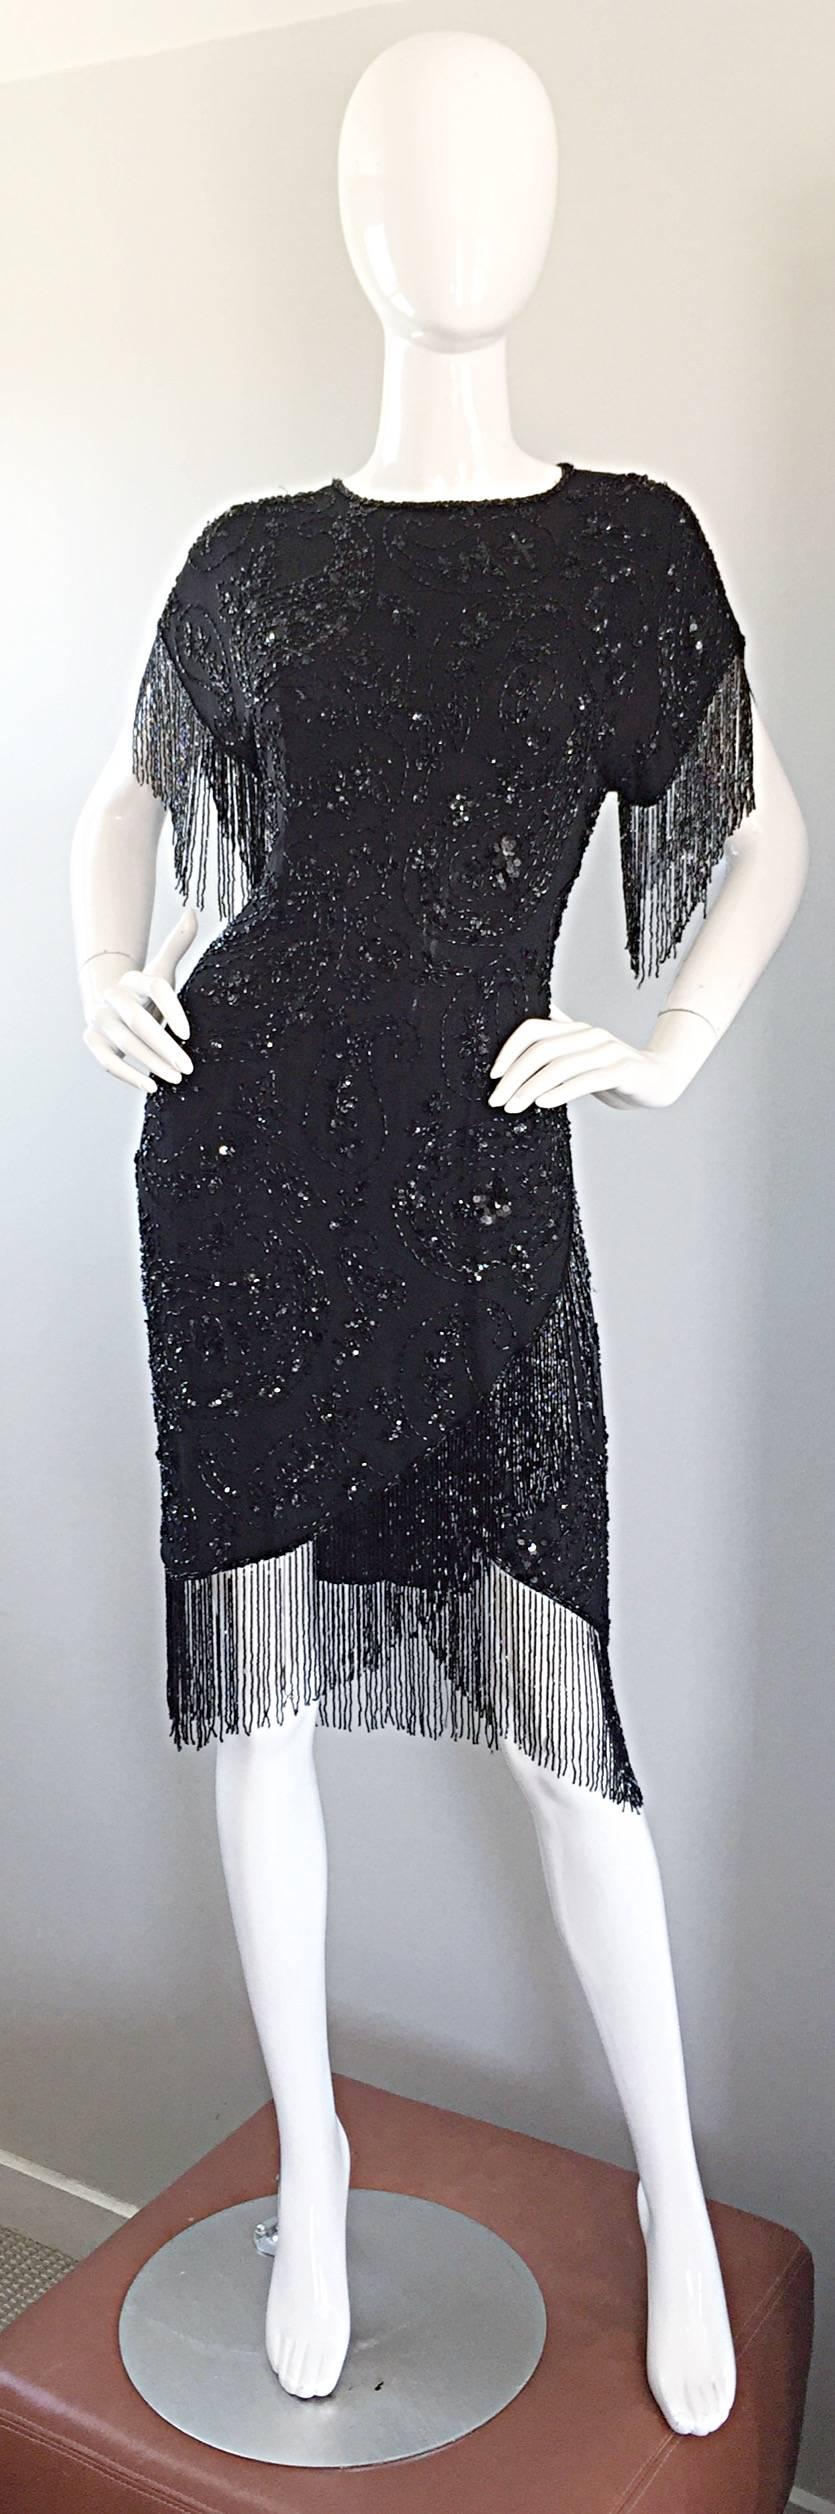 Exceptional vintage OLEG CASSINI black silk beaded 'Flapper' style dress! Features all-over (THOUSANDS) hand-sewn sequins and beads, with intricate beaded fringe hanging from the arms, and throughout the front and back hem. Peek-a-boo back that